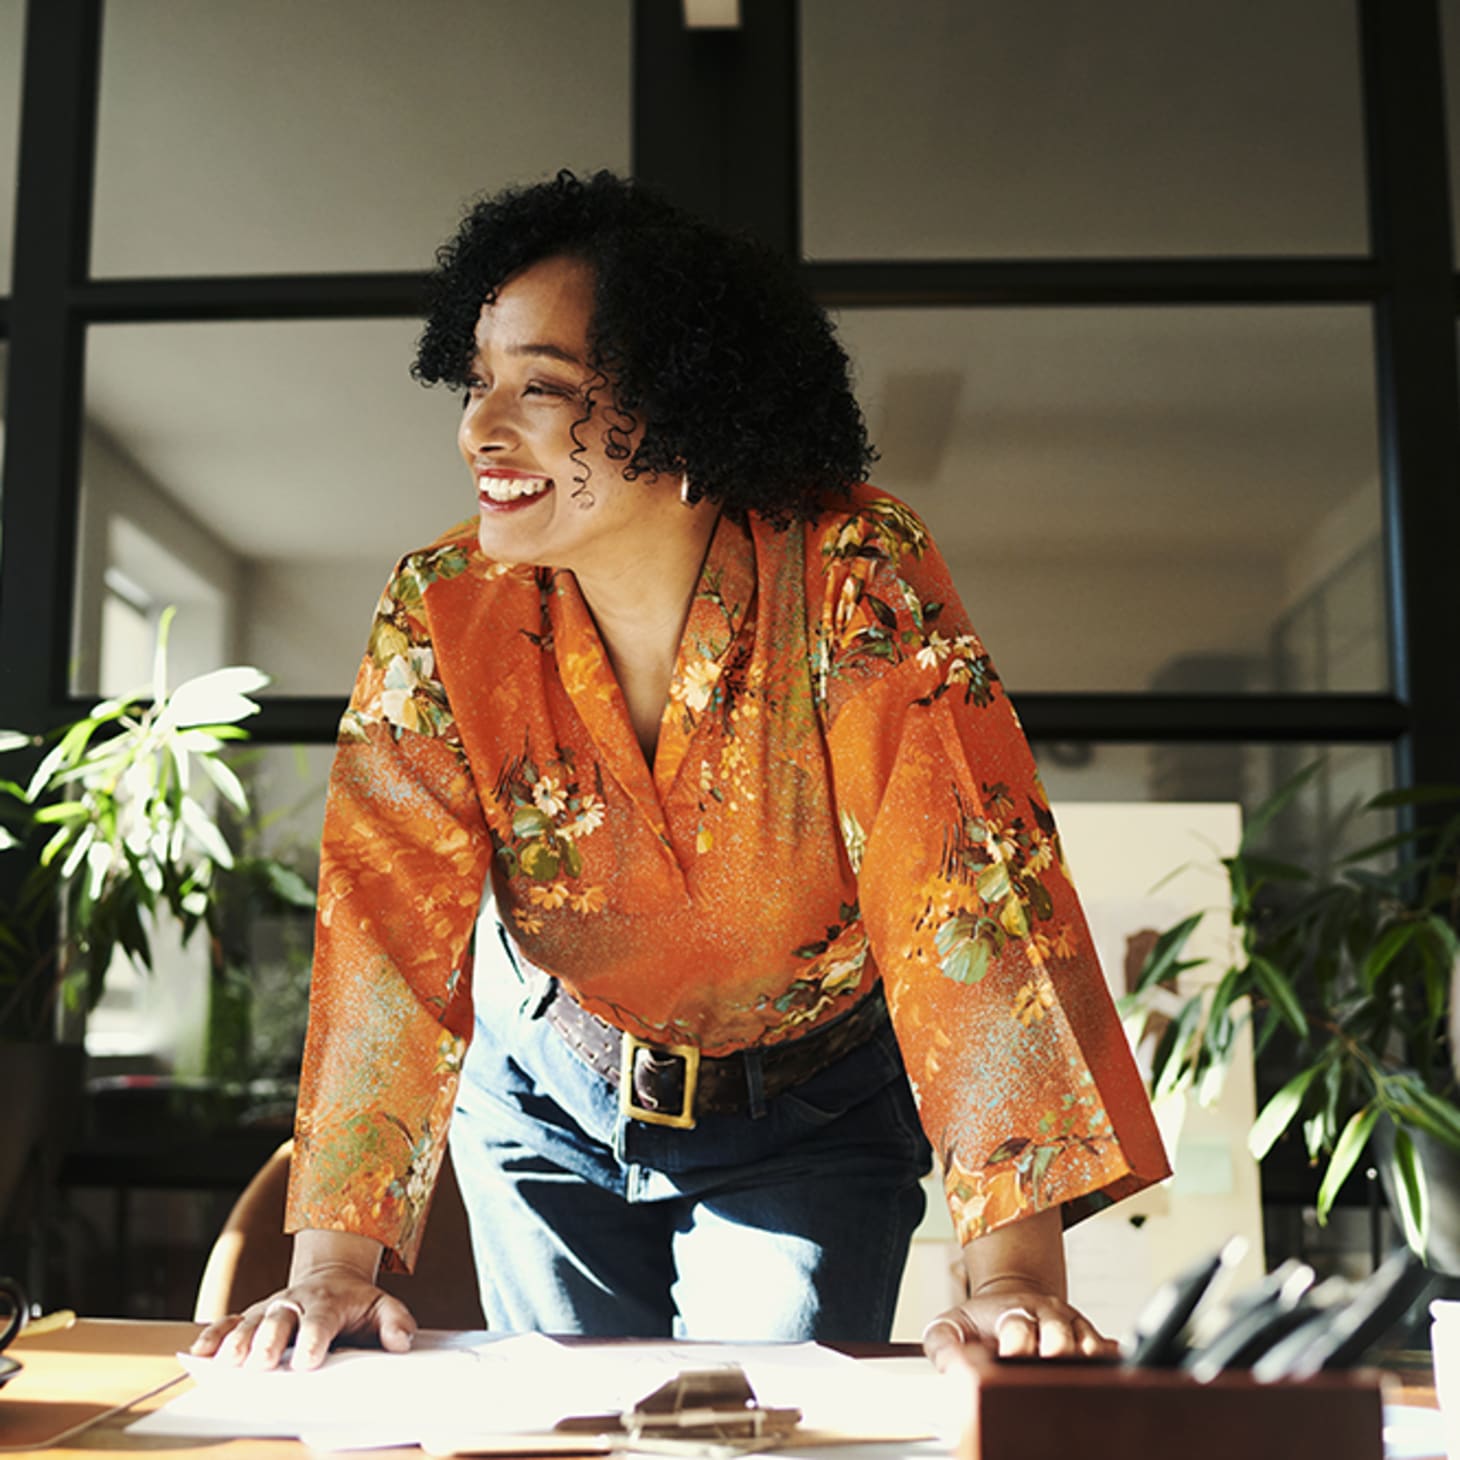 black woman in orange blouse smiling at computer leaning on desk in office with plants